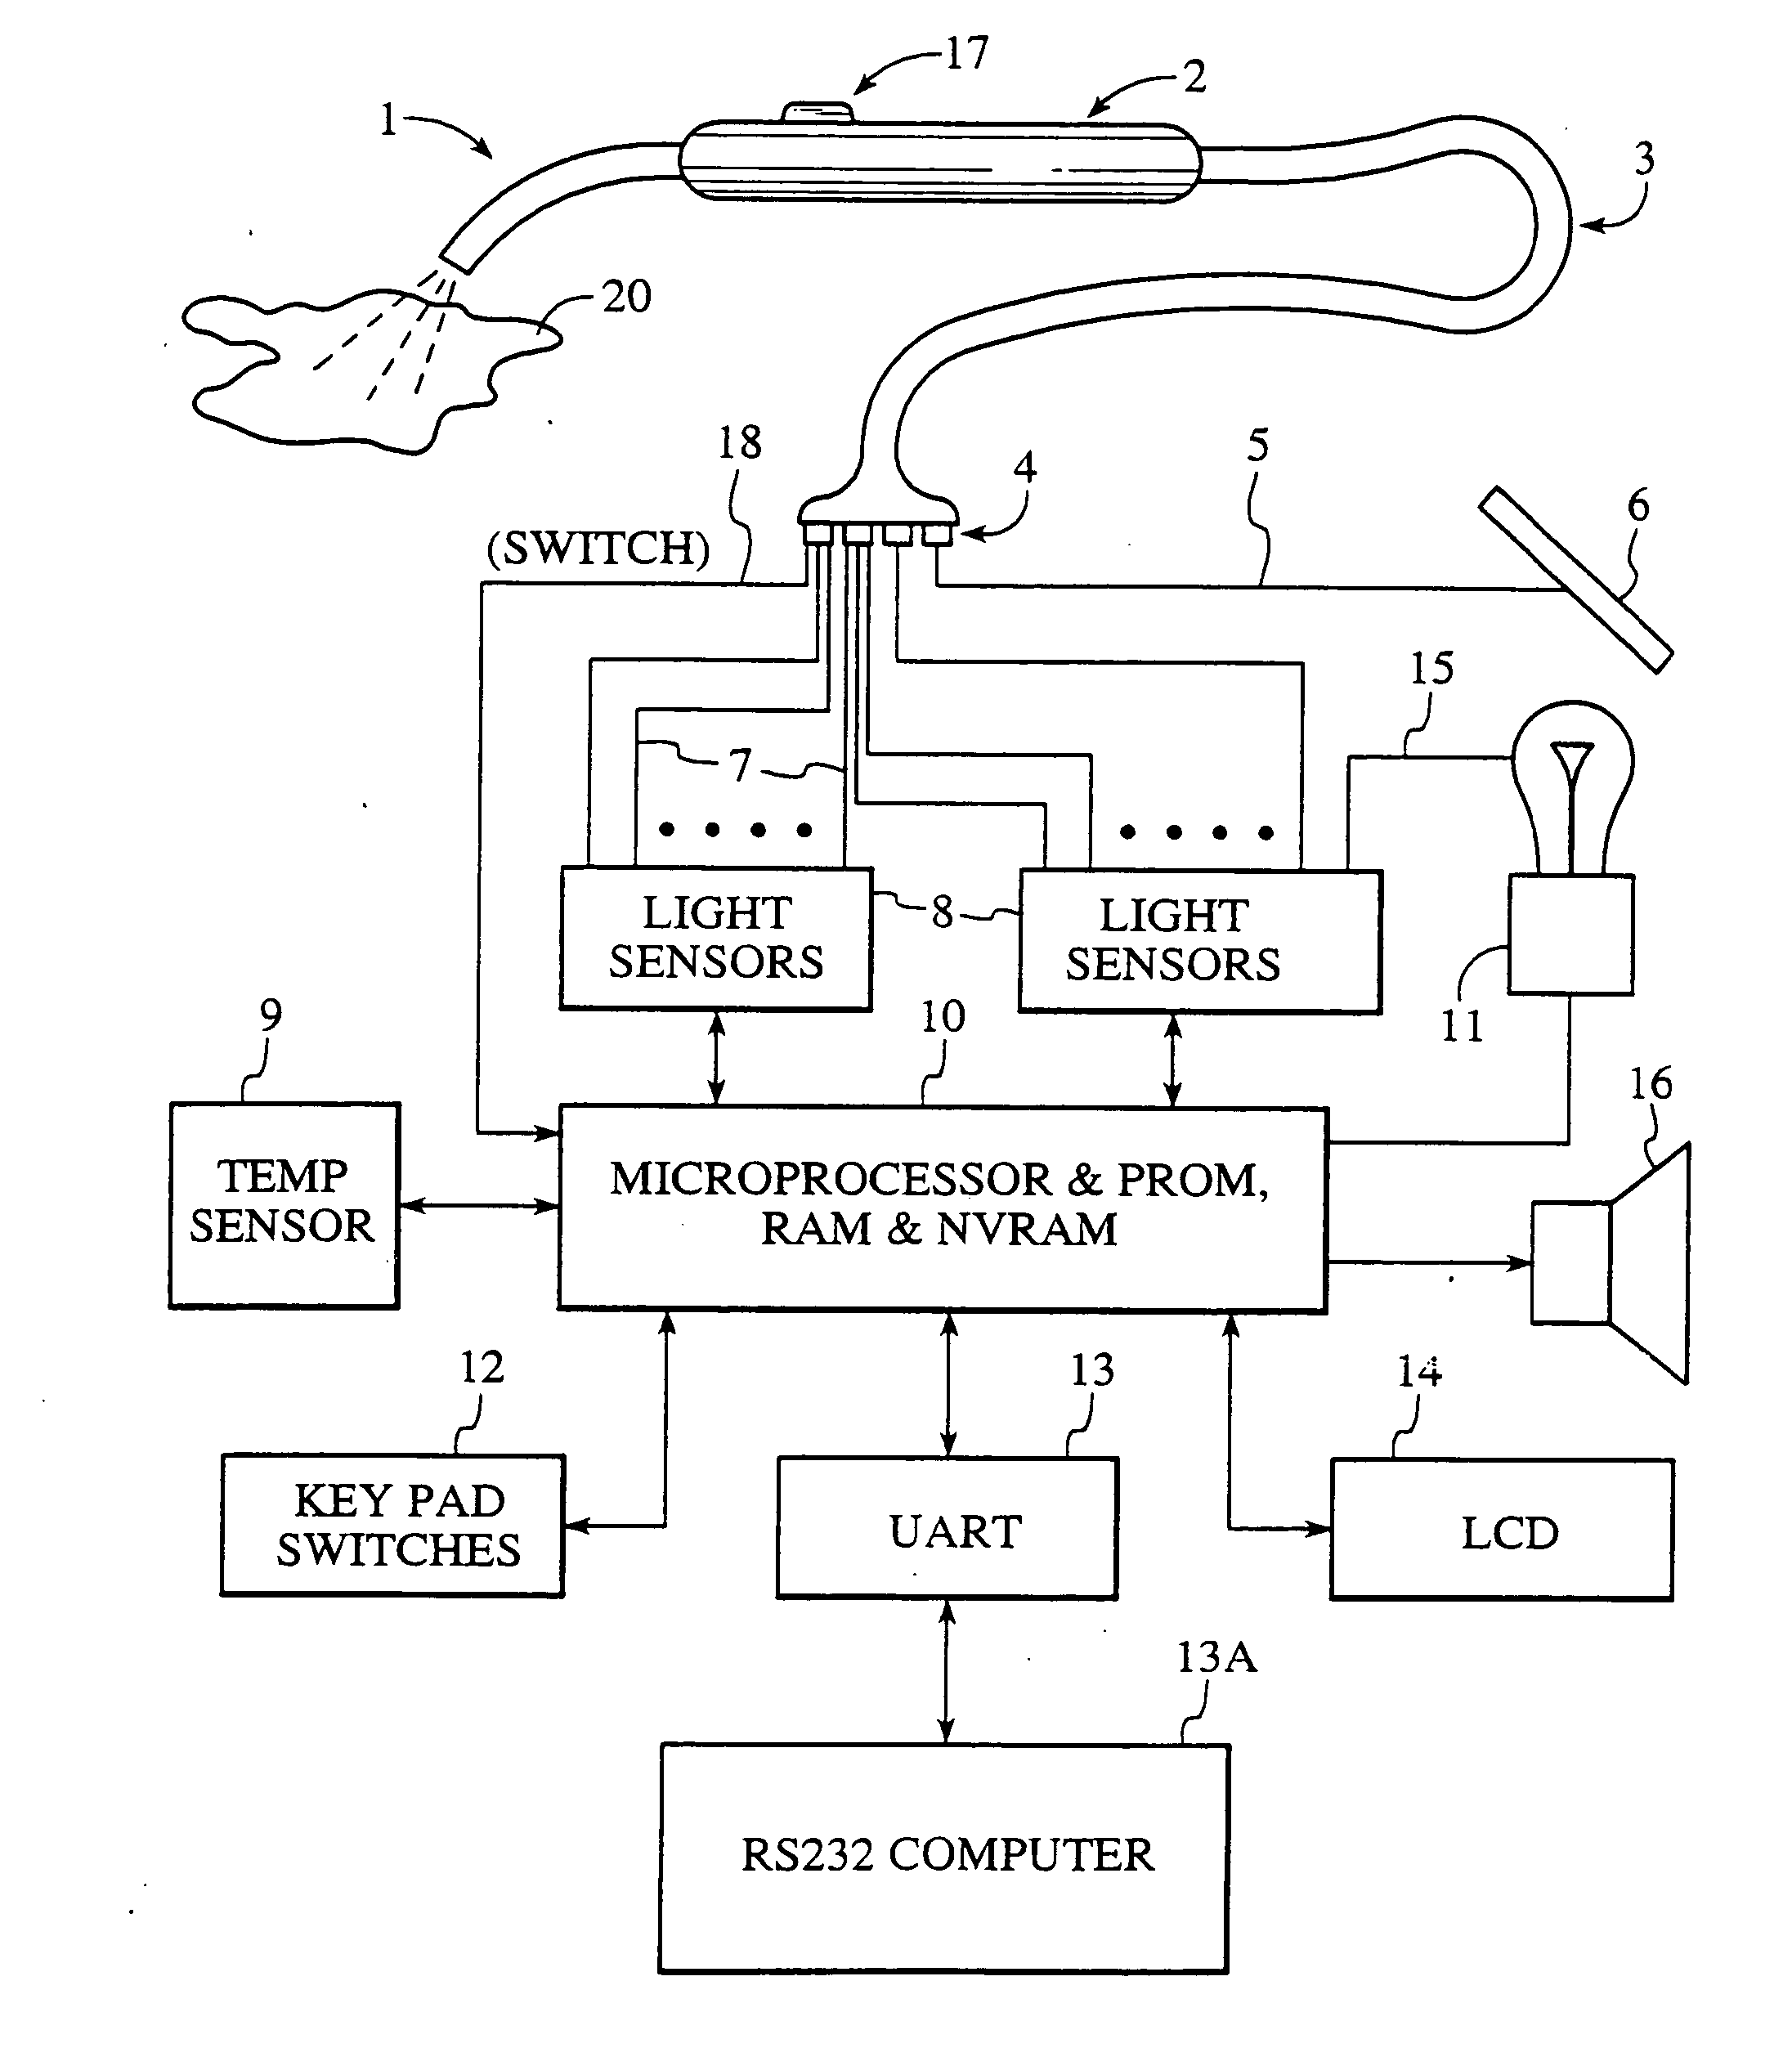 Apparatus and method for measuring color